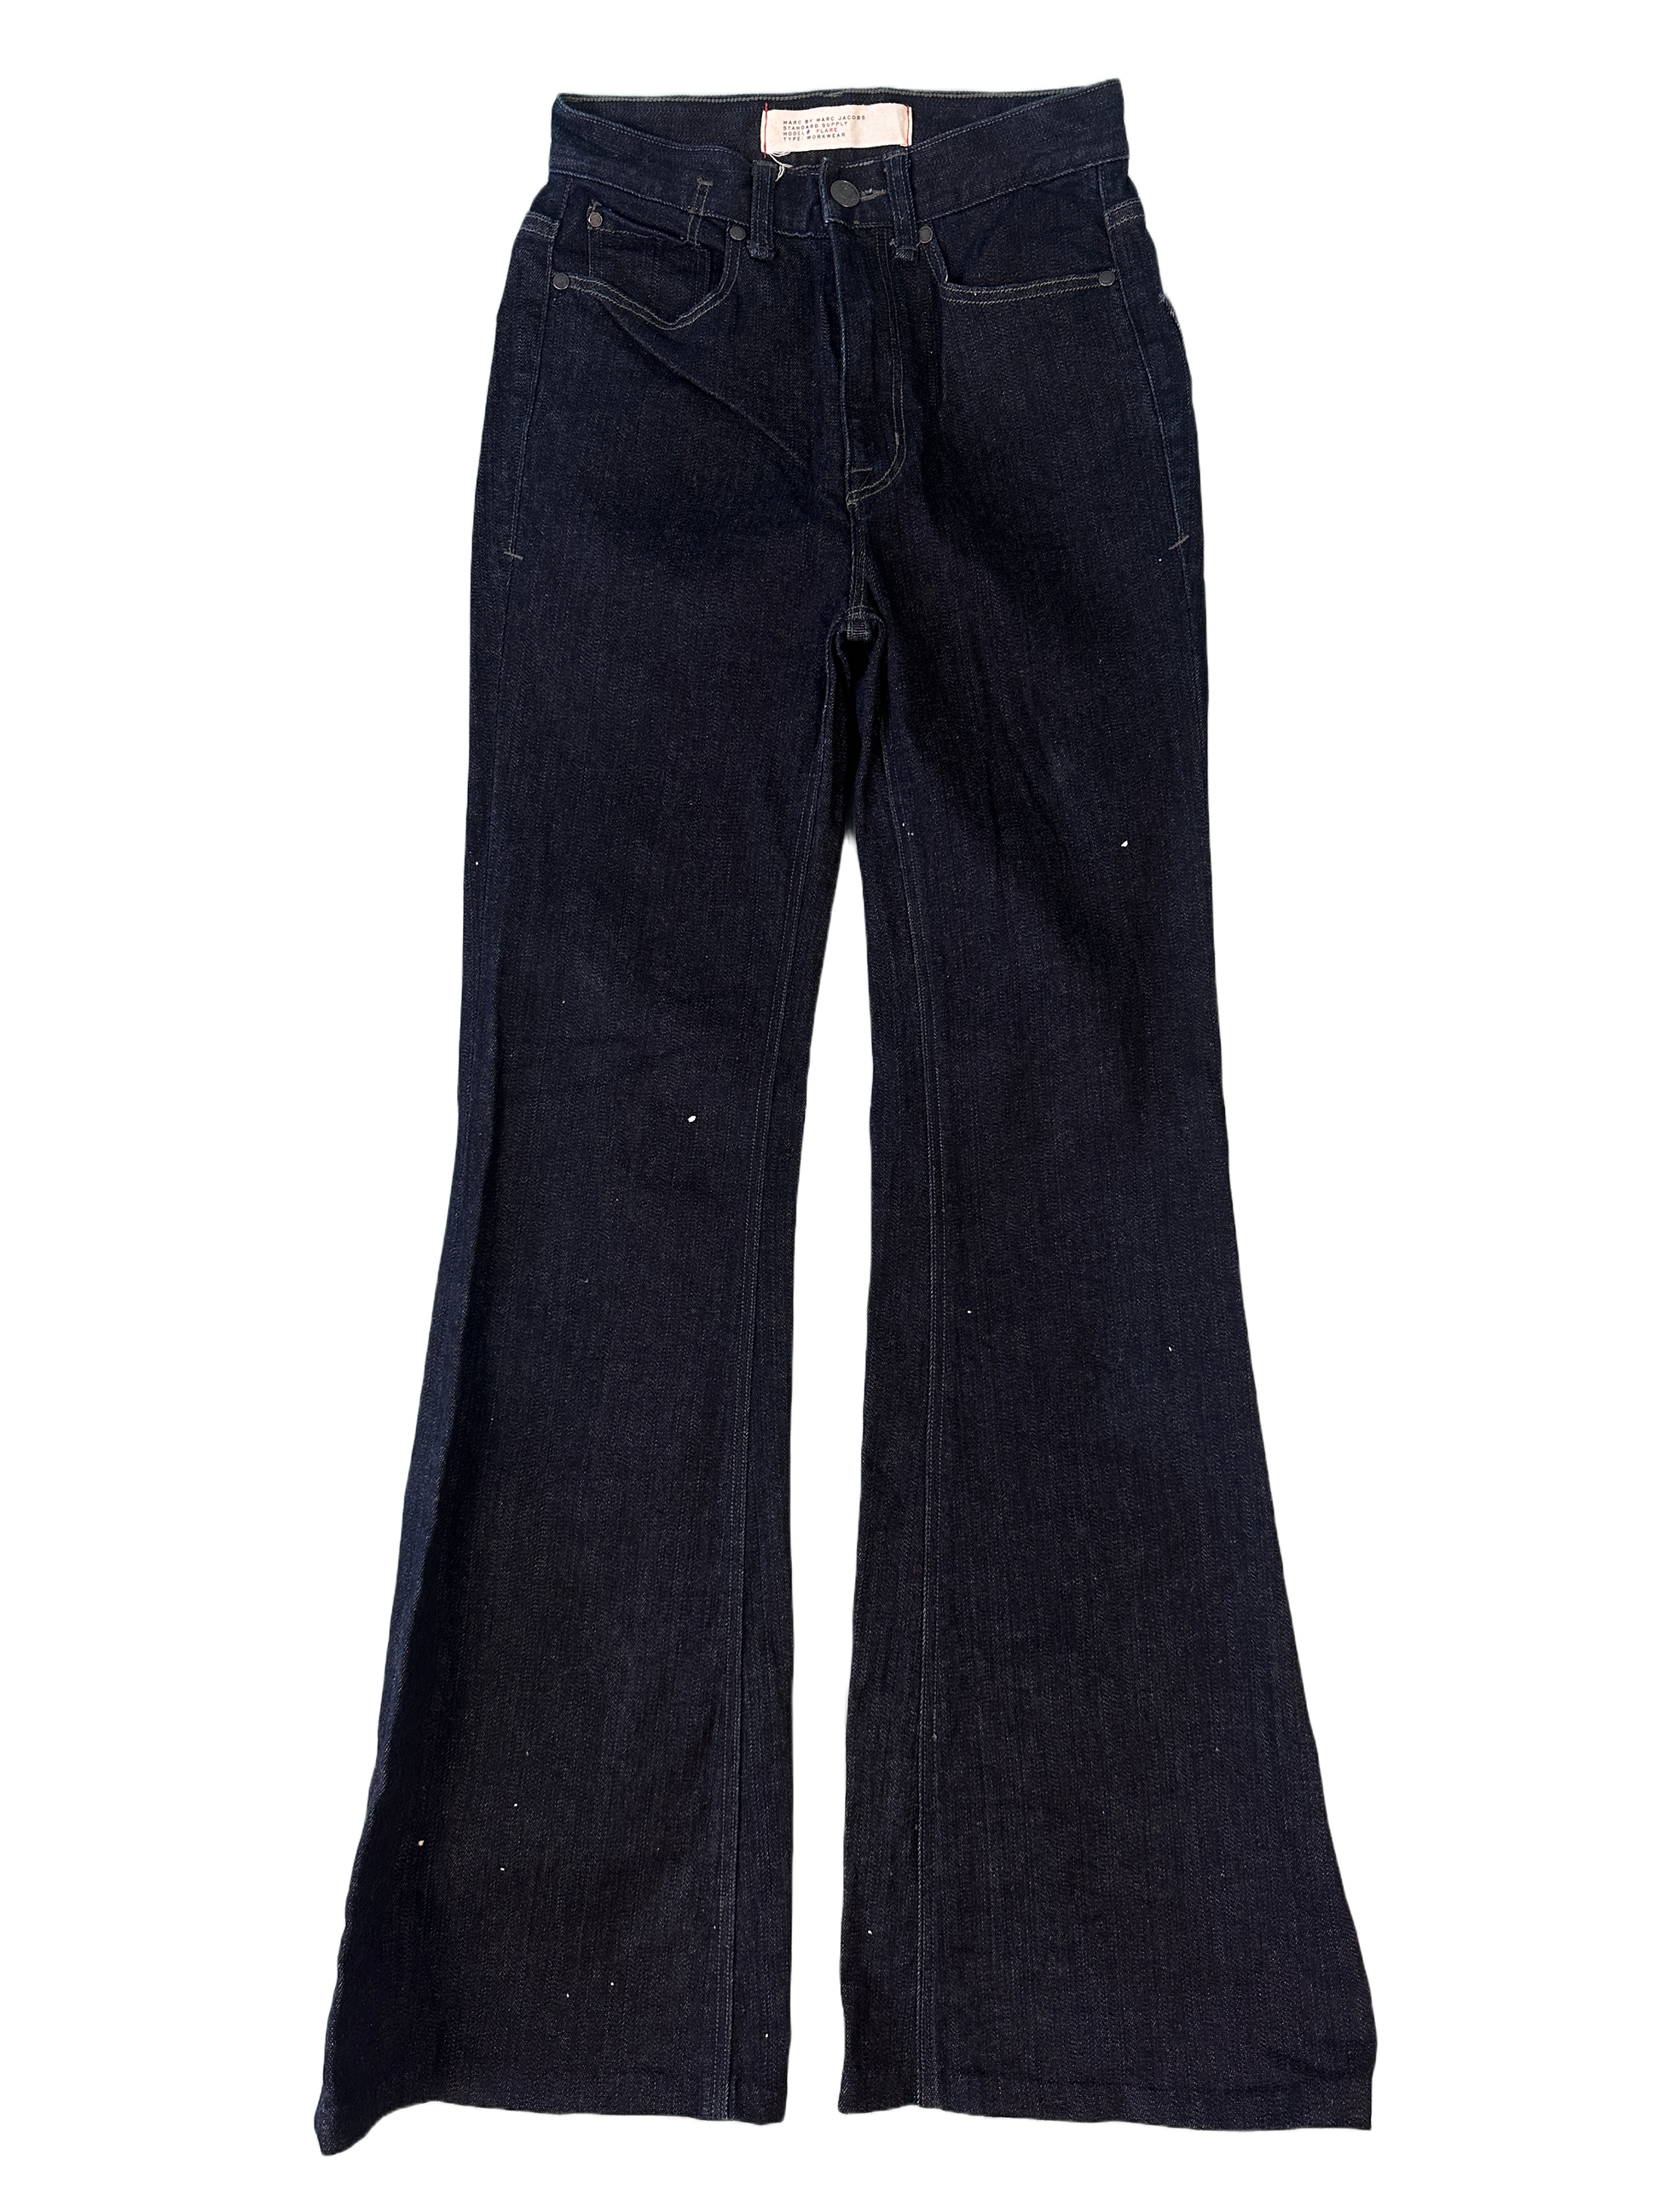 Marc Jacobs Flair Workwear Jeans - 24 – Ropa Chidx